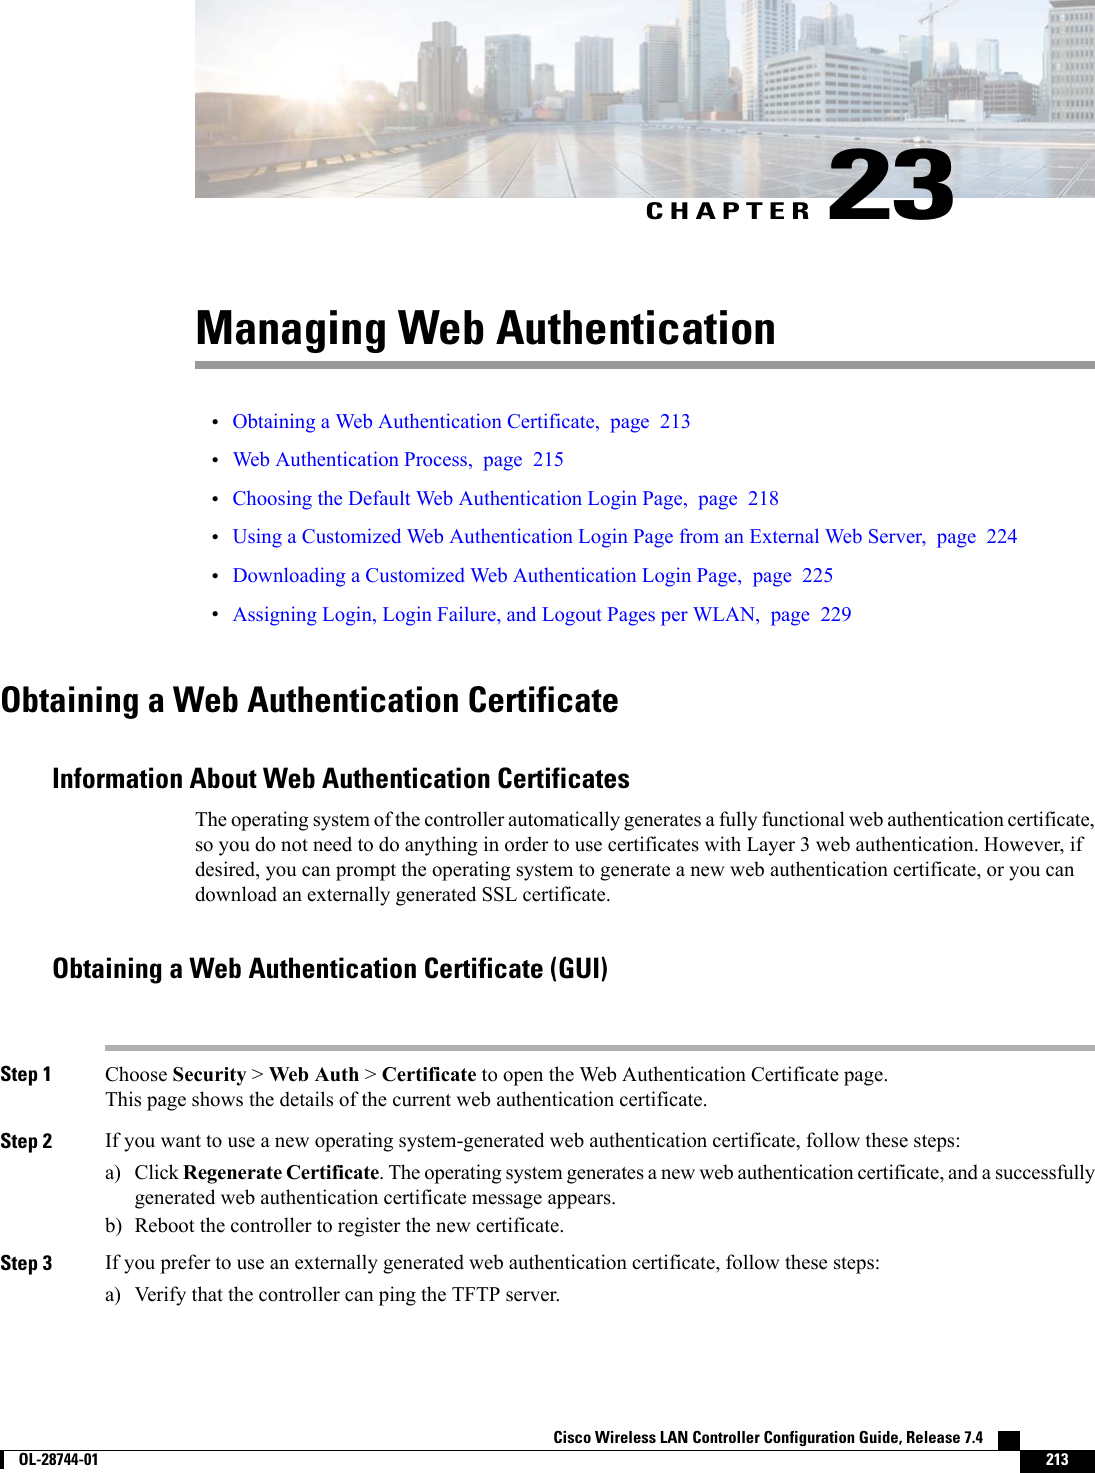 CHAPTER 23Managing Web Authentication•Obtaining a Web Authentication Certificate, page 213•Web Authentication Process, page 215•Choosing the Default Web Authentication Login Page, page 218•Using a Customized Web Authentication Login Page from an External Web Server, page 224•Downloading a Customized Web Authentication Login Page, page 225•Assigning Login, Login Failure, and Logout Pages per WLAN, page 229Obtaining a Web Authentication CertificateInformation About Web Authentication CertificatesThe operating system of the controller automatically generates a fully functional web authentication certificate,so you do not need to do anything in order to use certificates with Layer 3 web authentication. However, ifdesired, you can prompt the operating system to generate a new web authentication certificate, or you candownload an externally generated SSL certificate.Obtaining a Web Authentication Certificate (GUI)Step 1 Choose Security &gt;Web Auth &gt;Certificate to open the Web Authentication Certificate page.This page shows the details of the current web authentication certificate.Step 2 If you want to use a new operating system-generated web authentication certificate, follow these steps:a) Click Regenerate Certificate. The operating system generates a new web authentication certificate, and a successfullygenerated web authentication certificate message appears.b) Reboot the controller to register the new certificate.Step 3 If you prefer to use an externally generated web authentication certificate, follow these steps:a) Verify that the controller can ping the TFTP server.Cisco Wireless LAN Controller Configuration Guide, Release 7.4        OL-28744-01 213